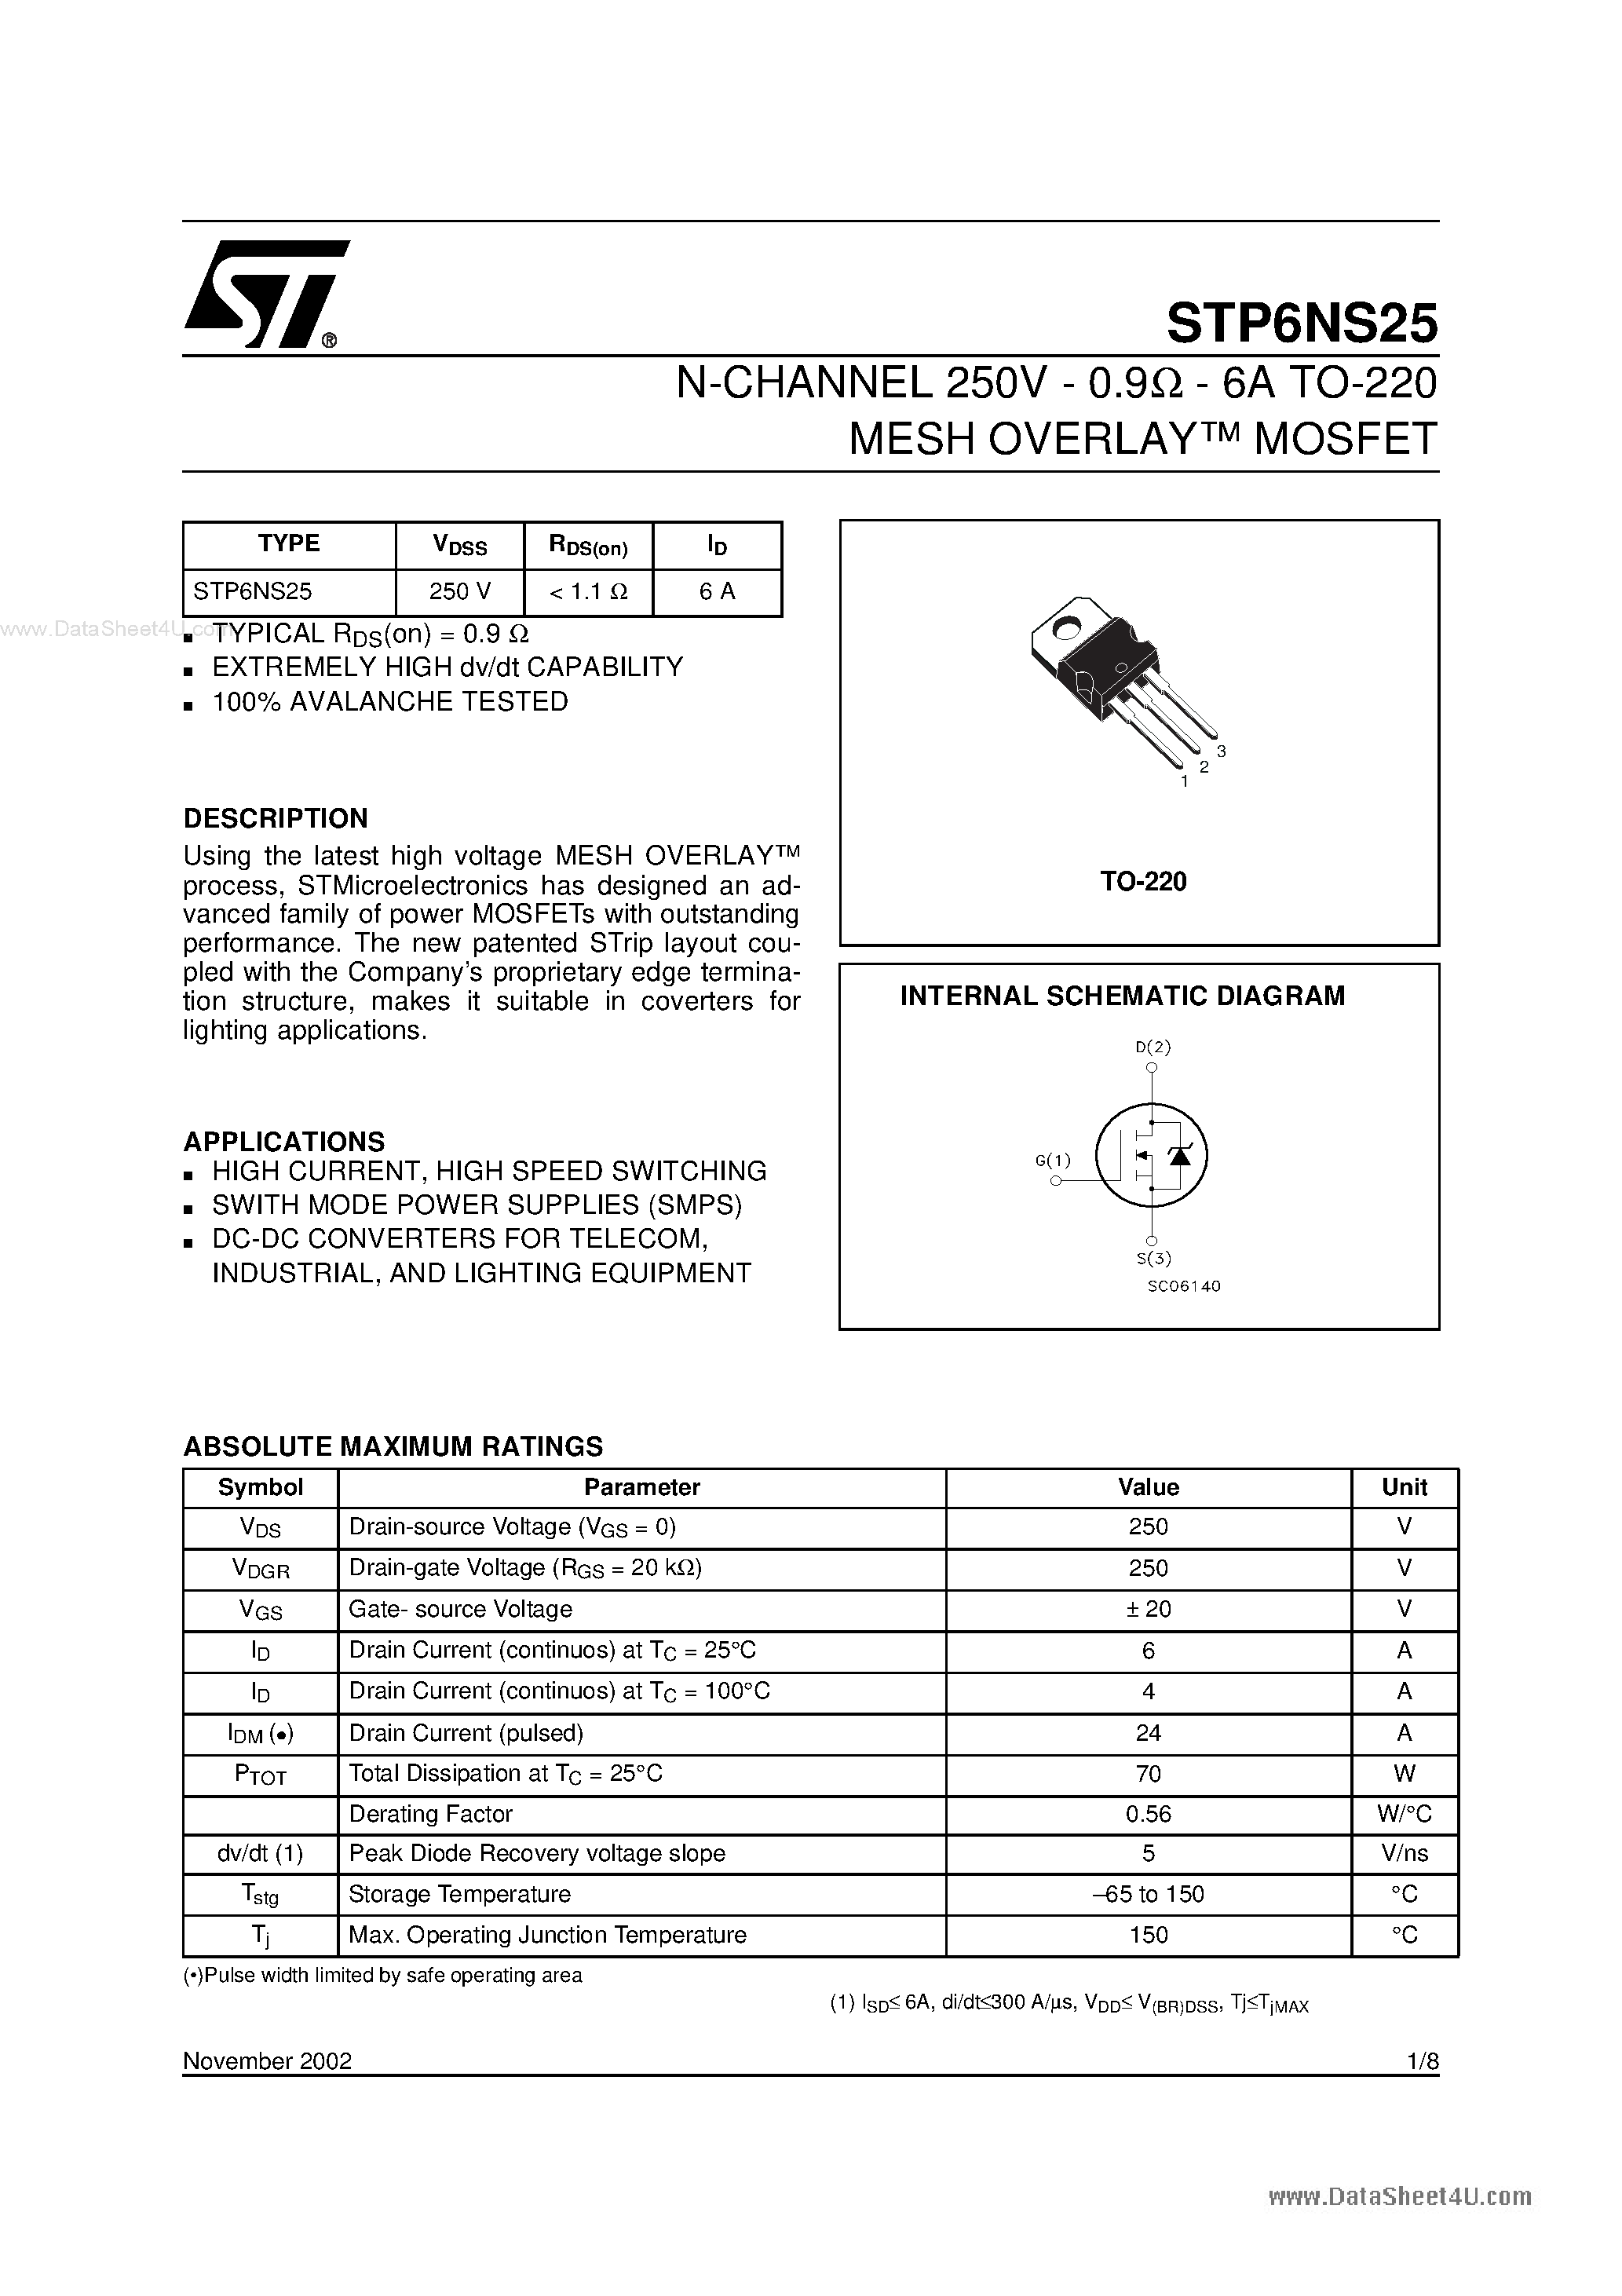 Datasheet STP6NS25 - N-CHANNEL MOSFET page 1